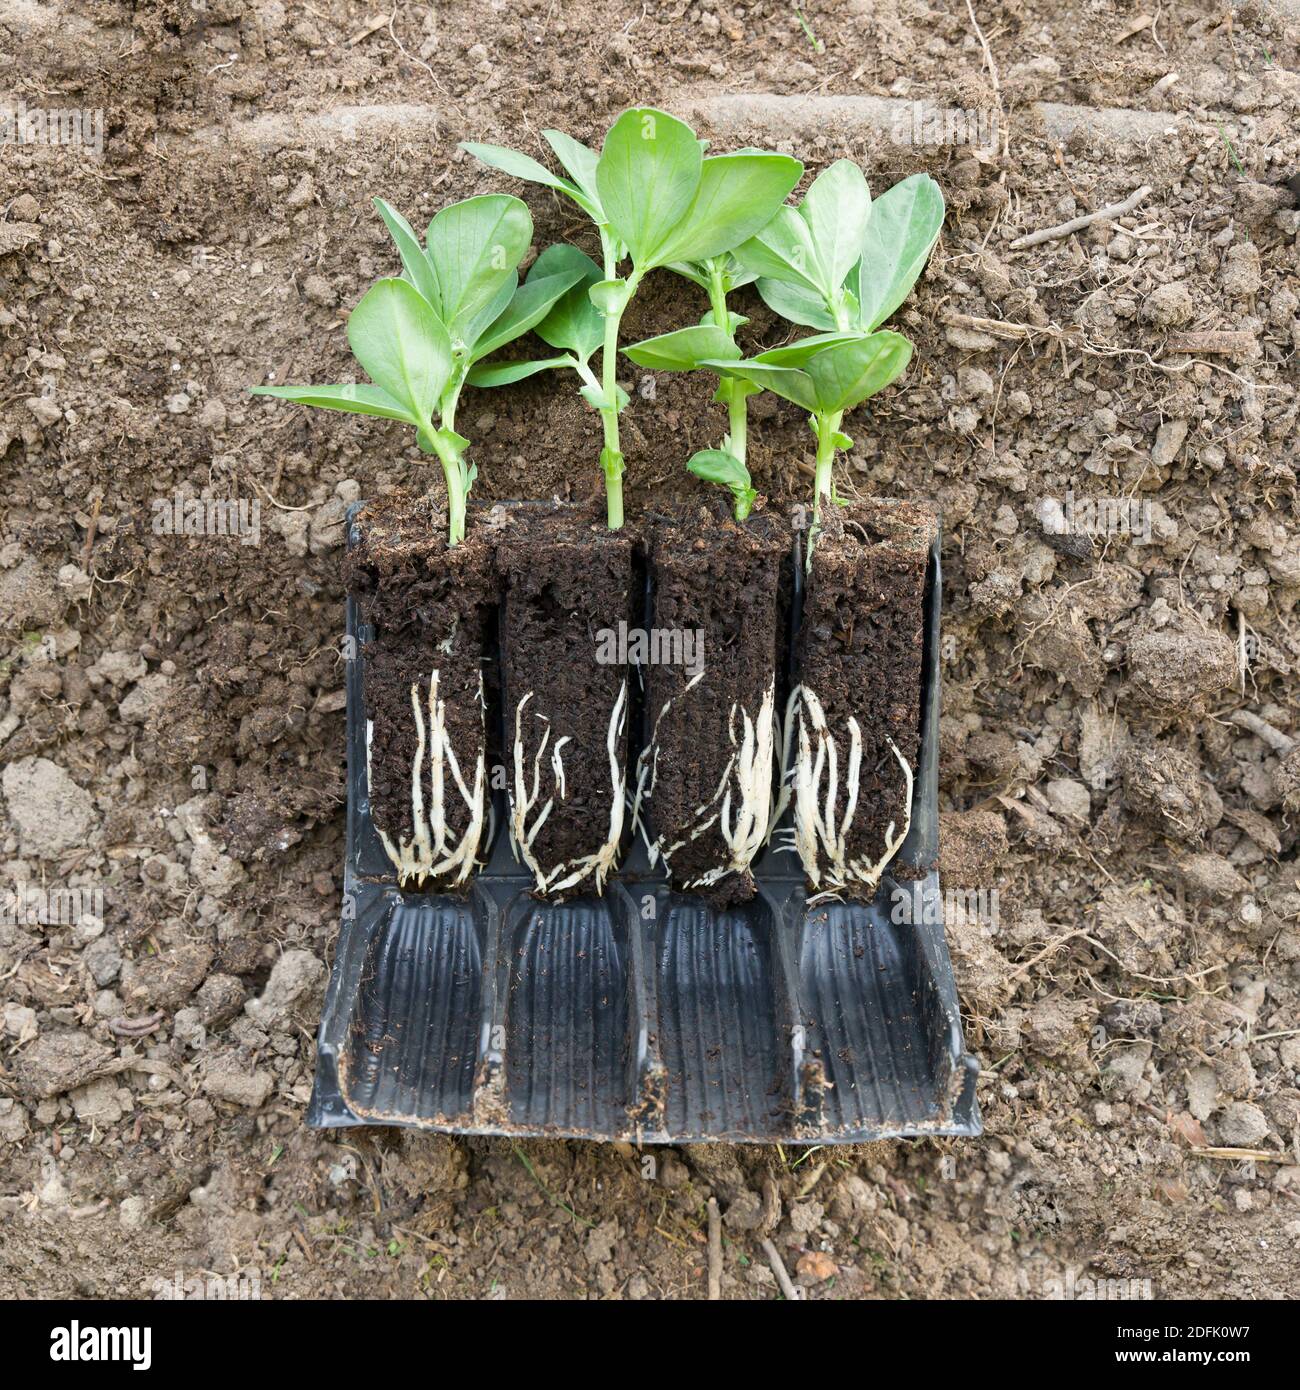 Vegetable plant (Broad bean de monica) seedlings in roottrainers on soil with roots visible, UK Stock Photo